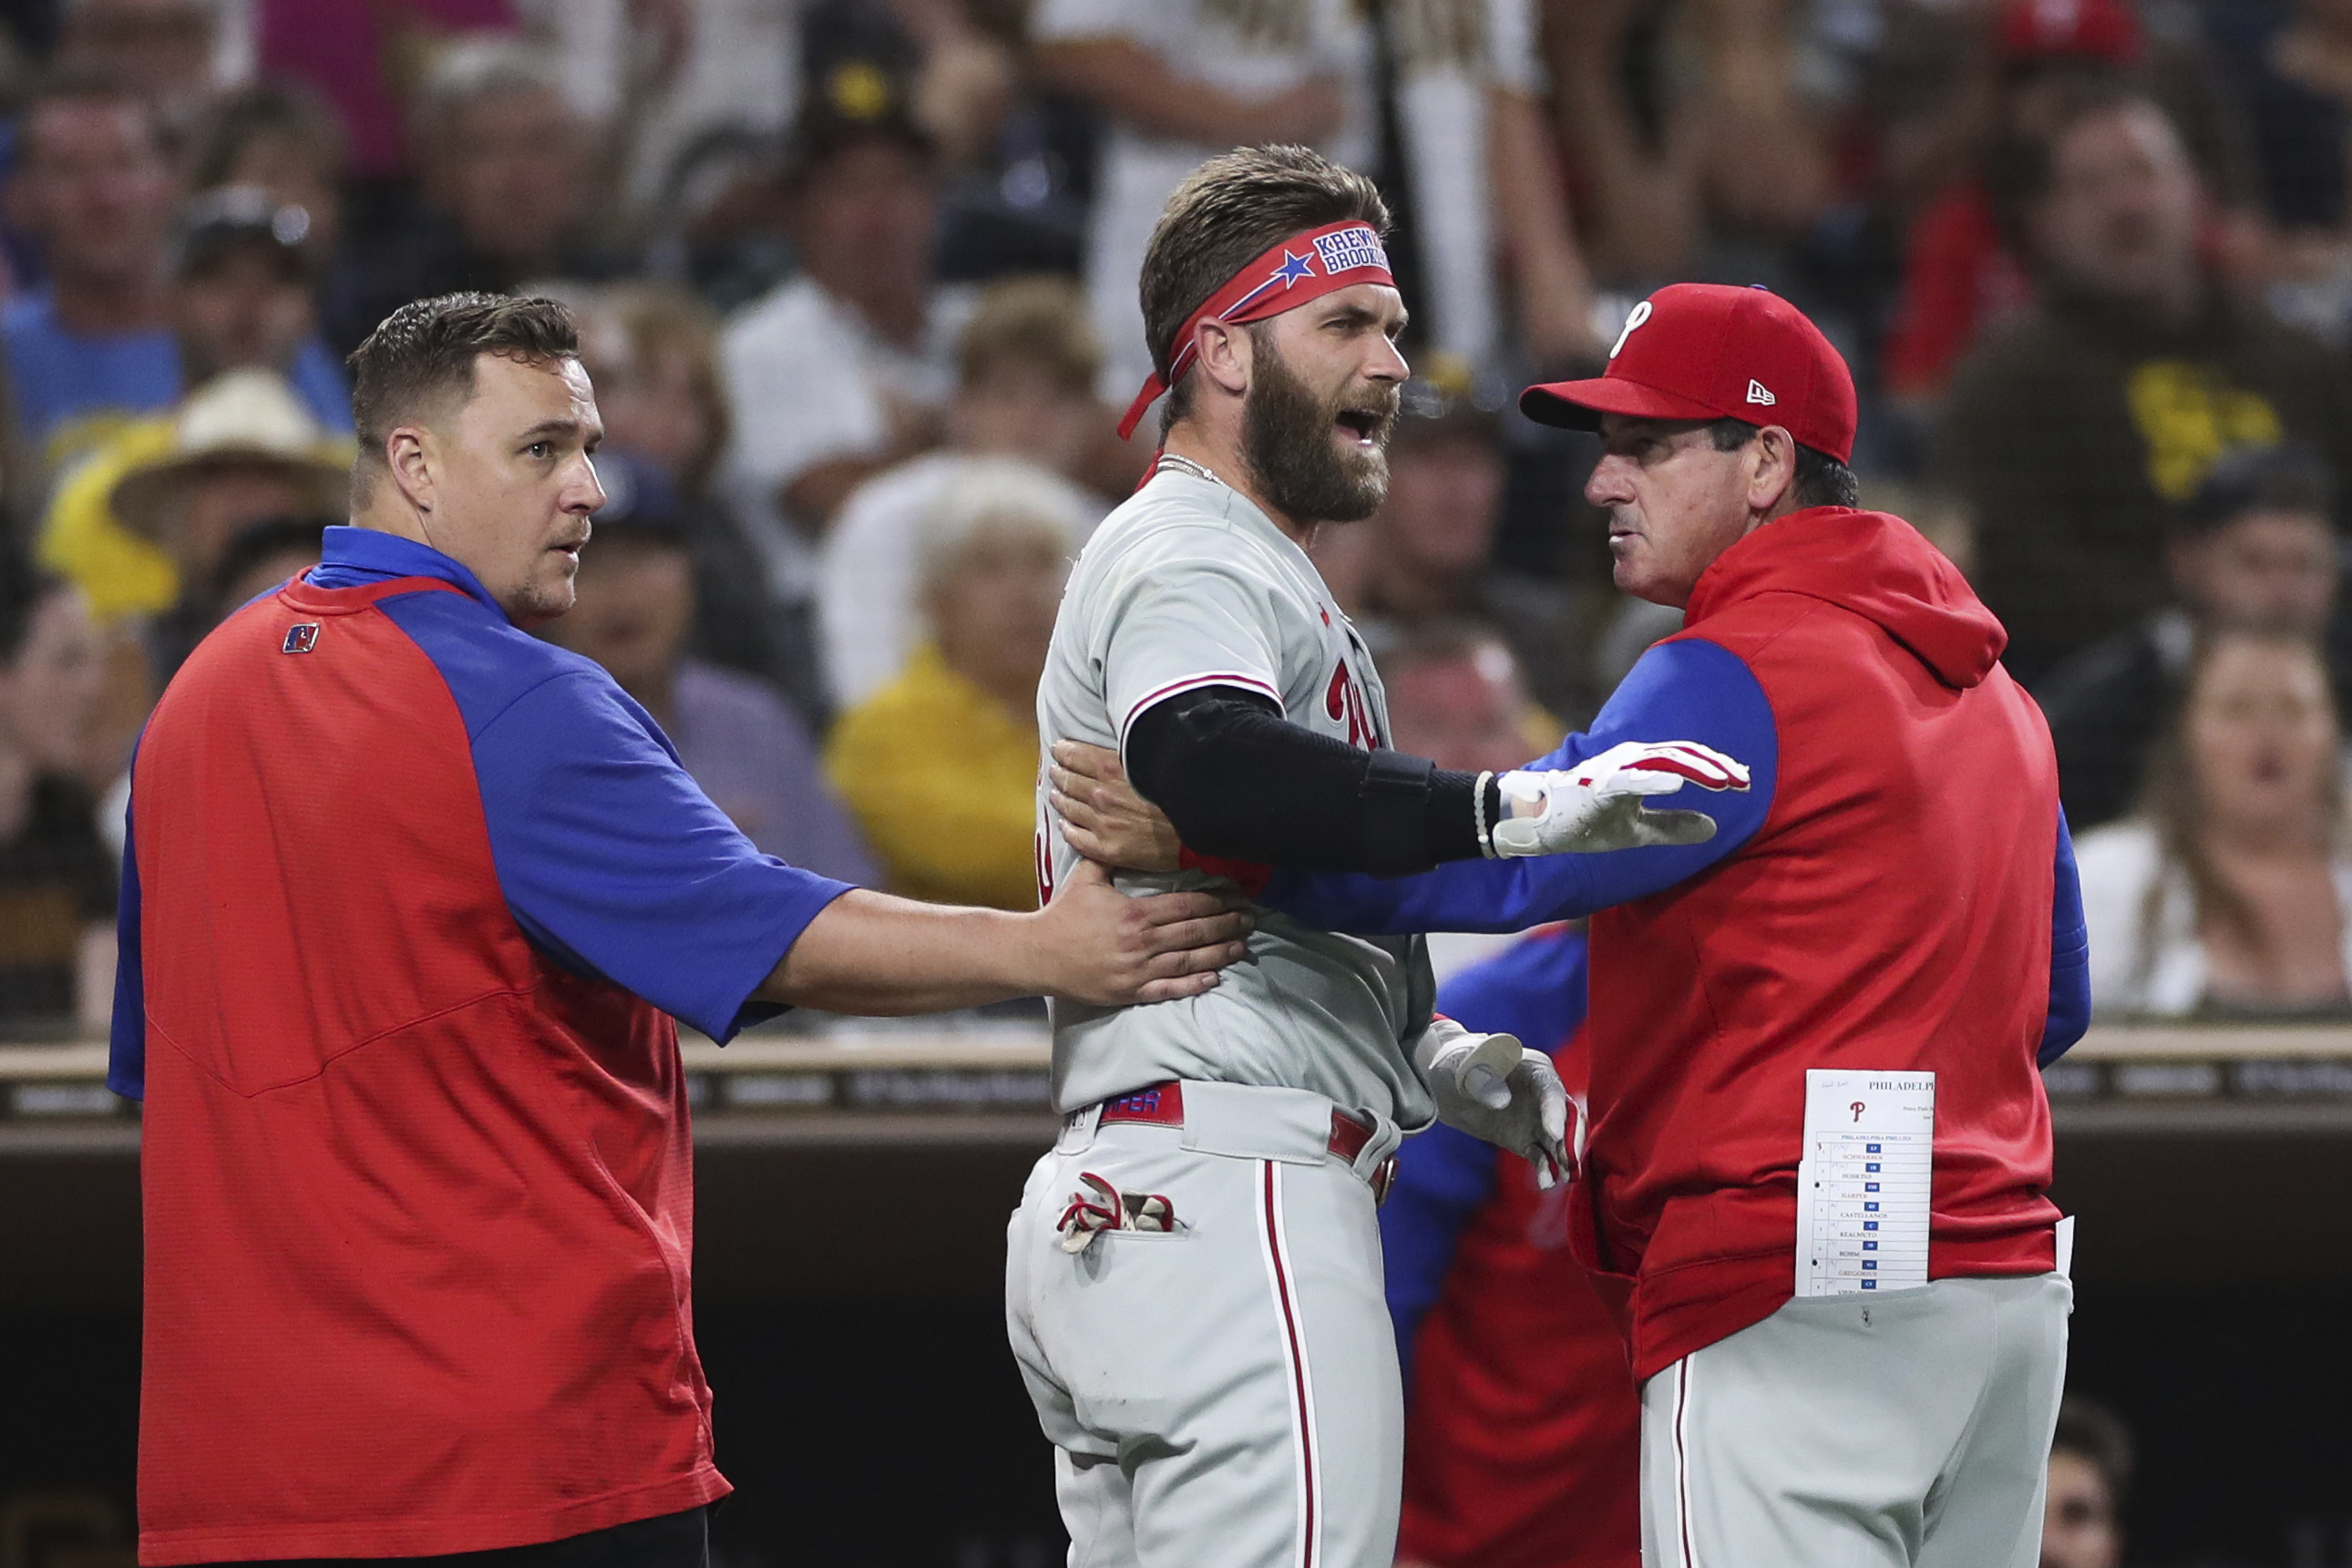 Bryce Harper shines as Phillies aim for second straight World